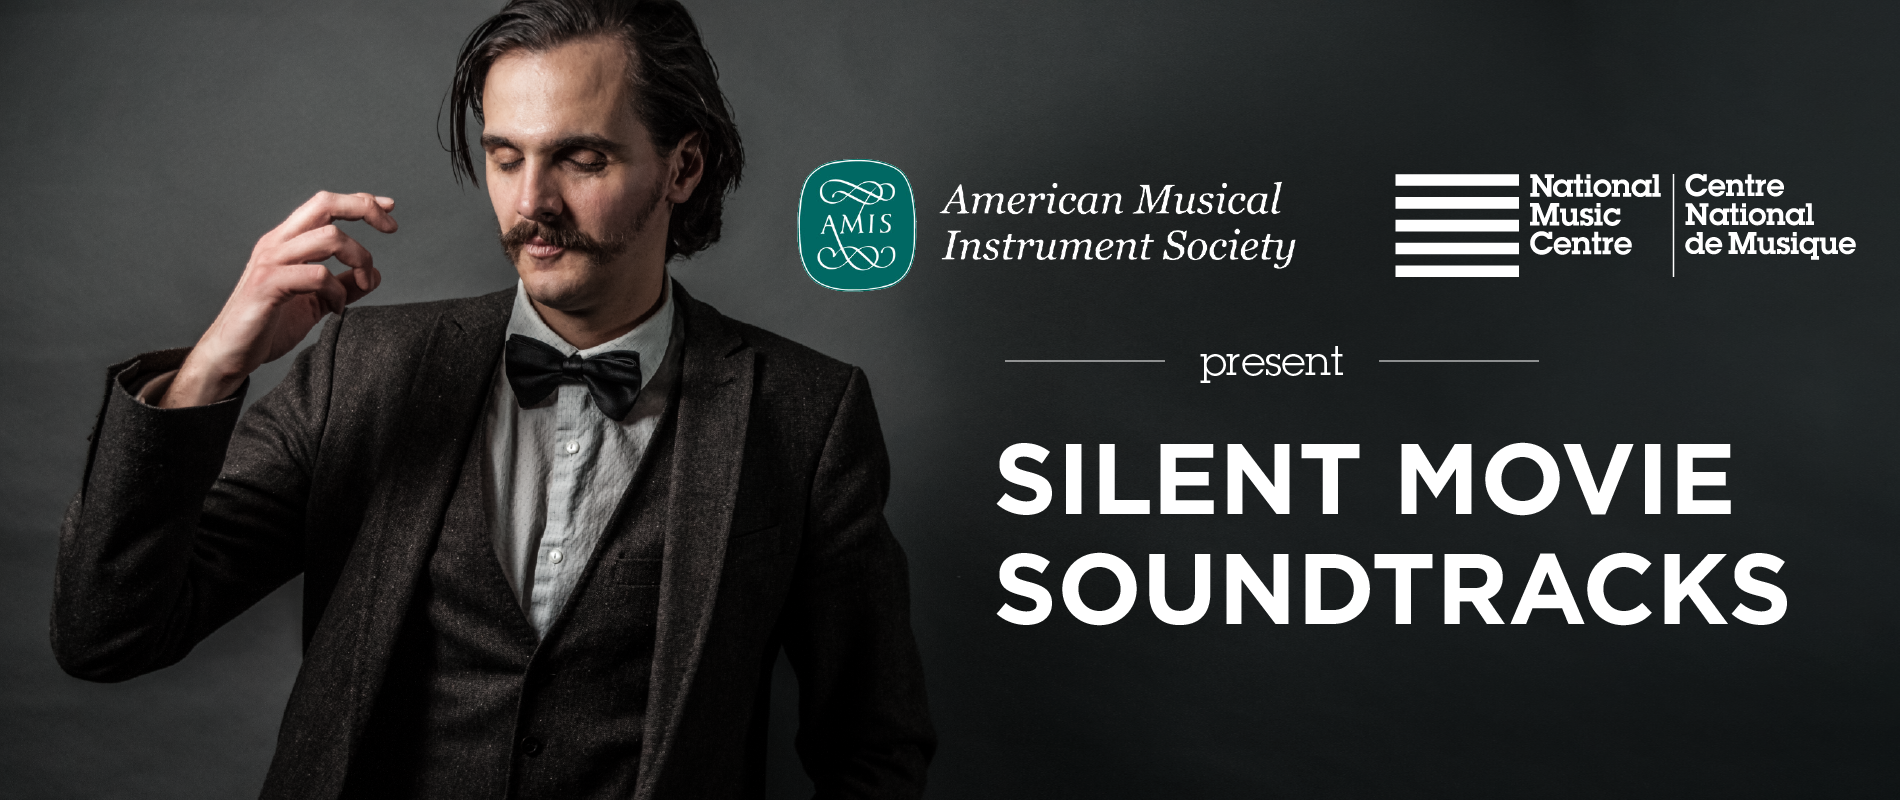 NMC and AMIS Present: Silent Movie Soundtracks Tickets